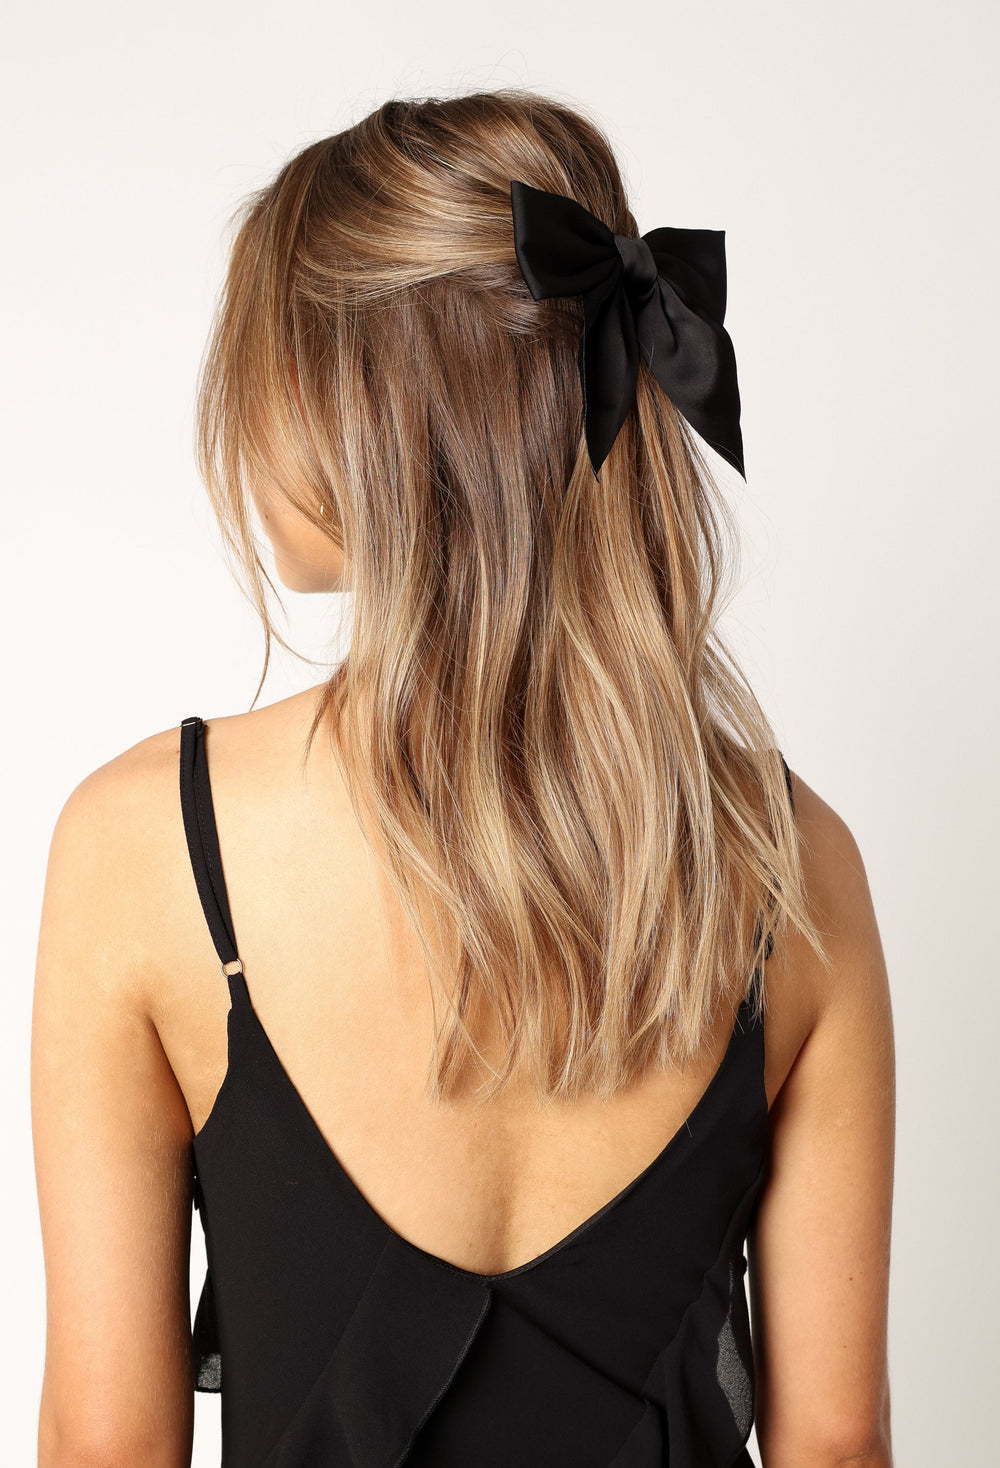 Petal and Pup USA ACCESSORIES Miranda Bow Hair Clip - Black One Size